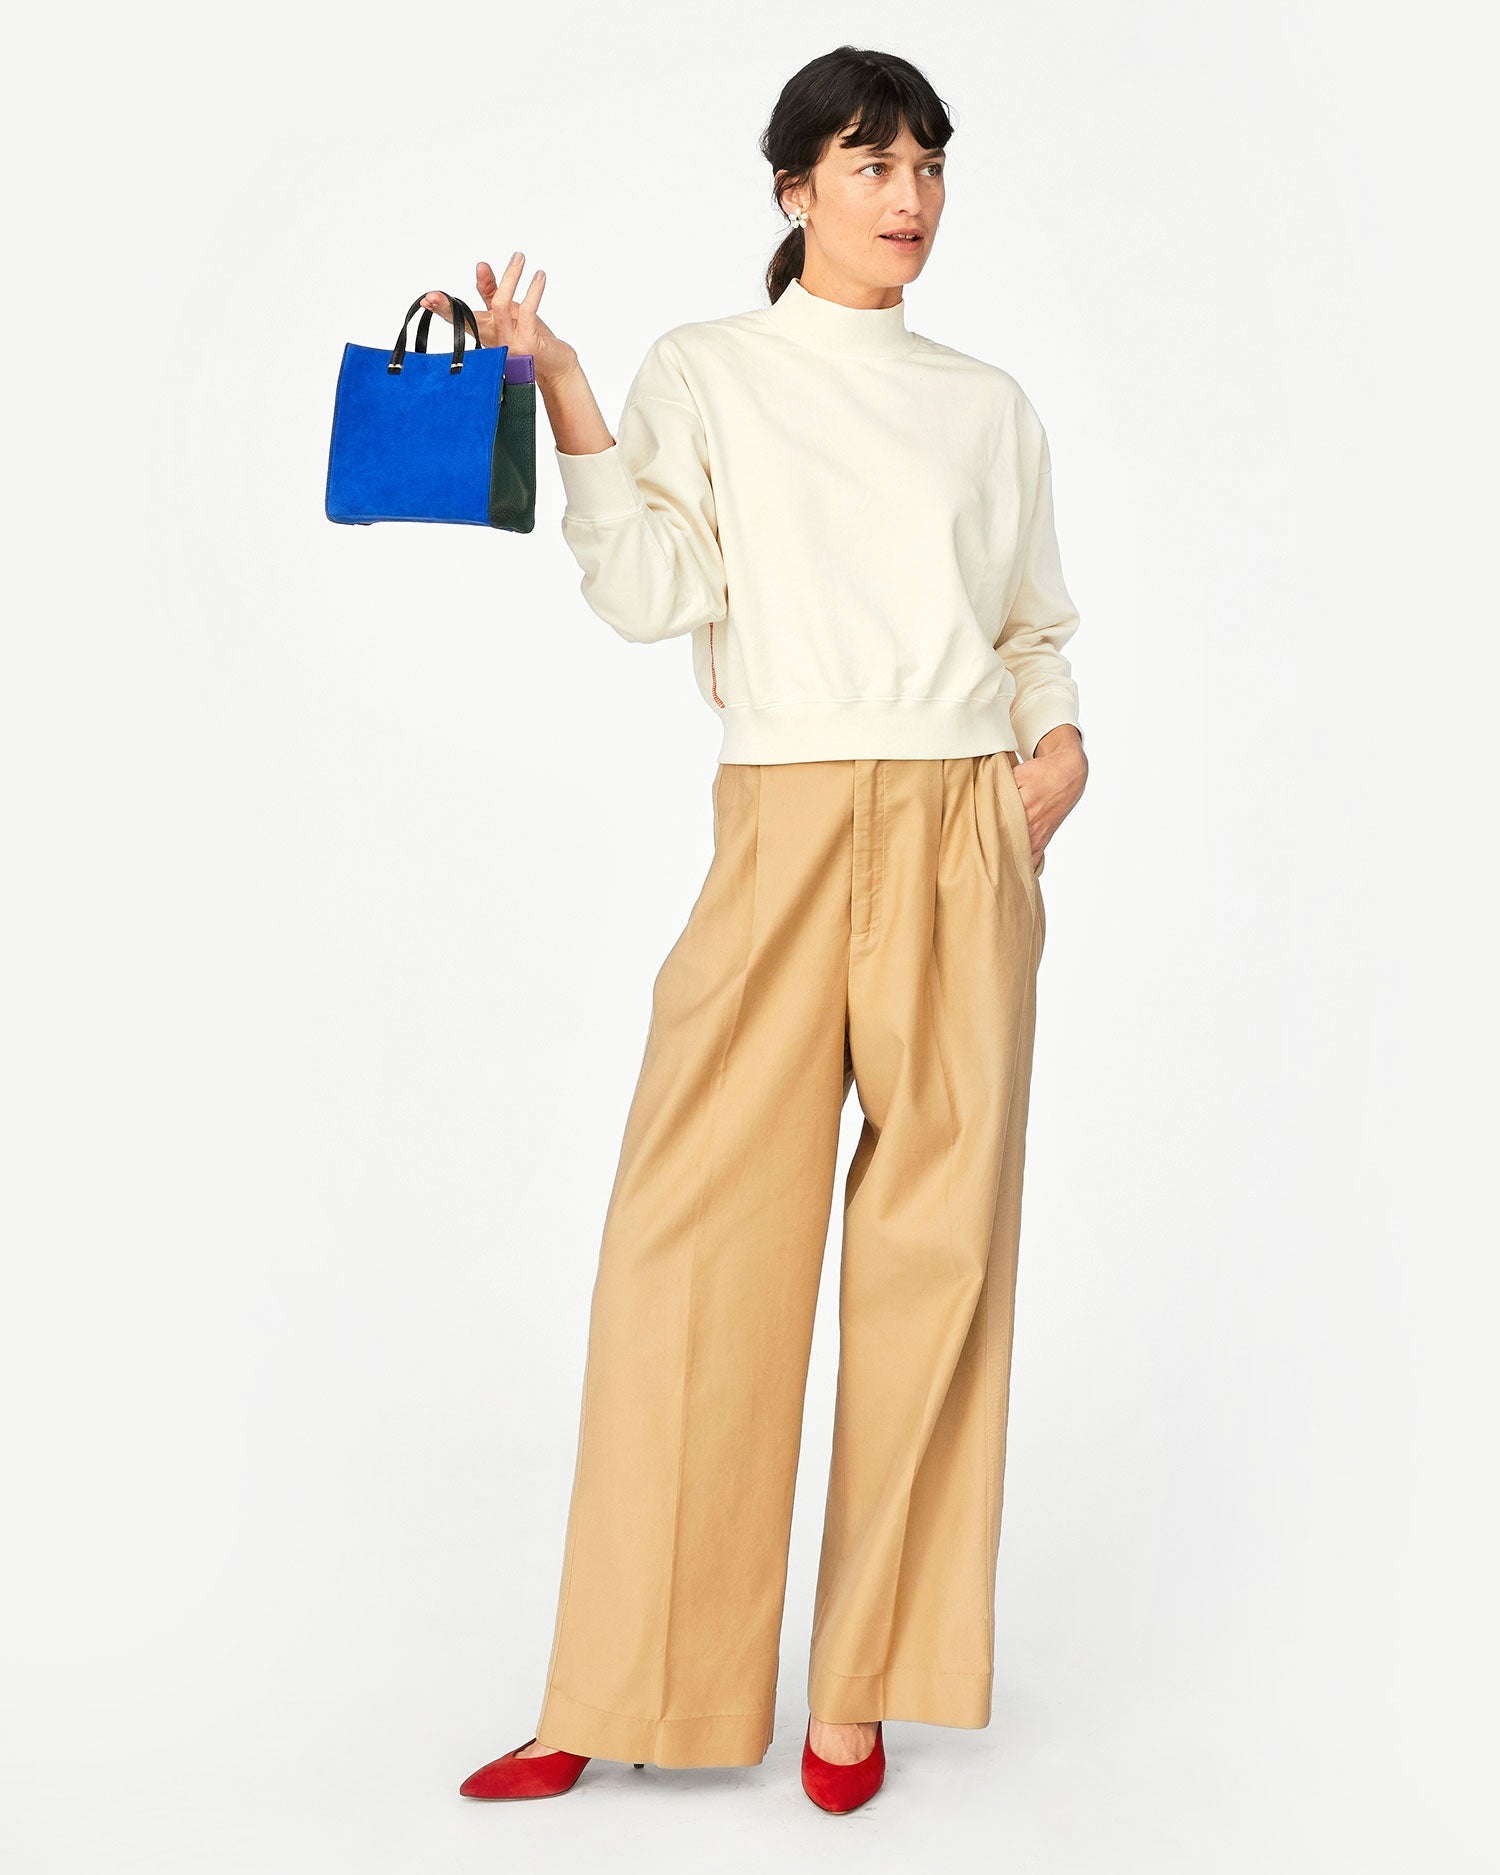 Danica wearing the Cream Le Drop Turtleneck with Khaki colored wide leg pants and holding our Electric Blue Simple Tote Bebe